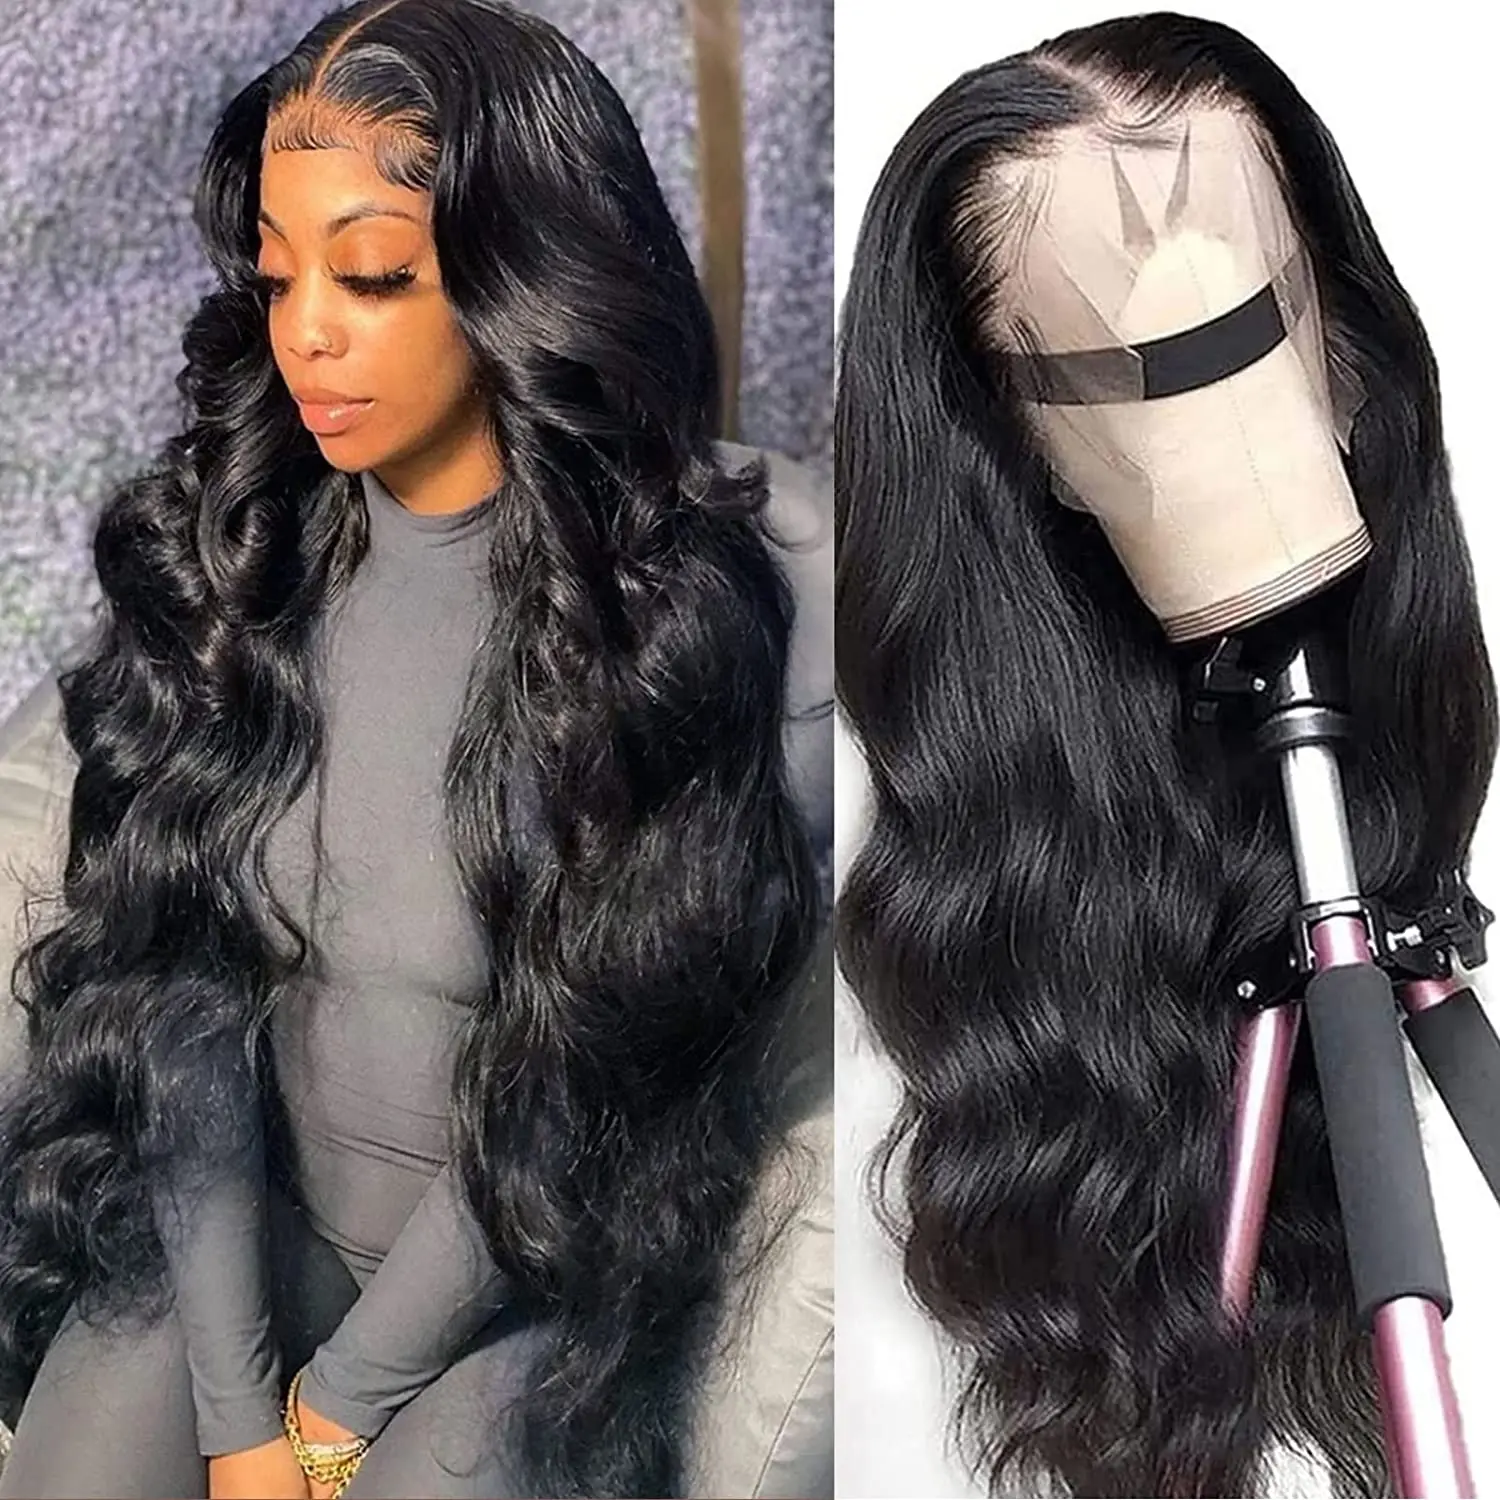 body-wave-lace-front-wigs-human-hair-13x4-transparent-lace-frontal-wigs-for-women-glueless-wigs-bling-remy-100-human-hair-wigs